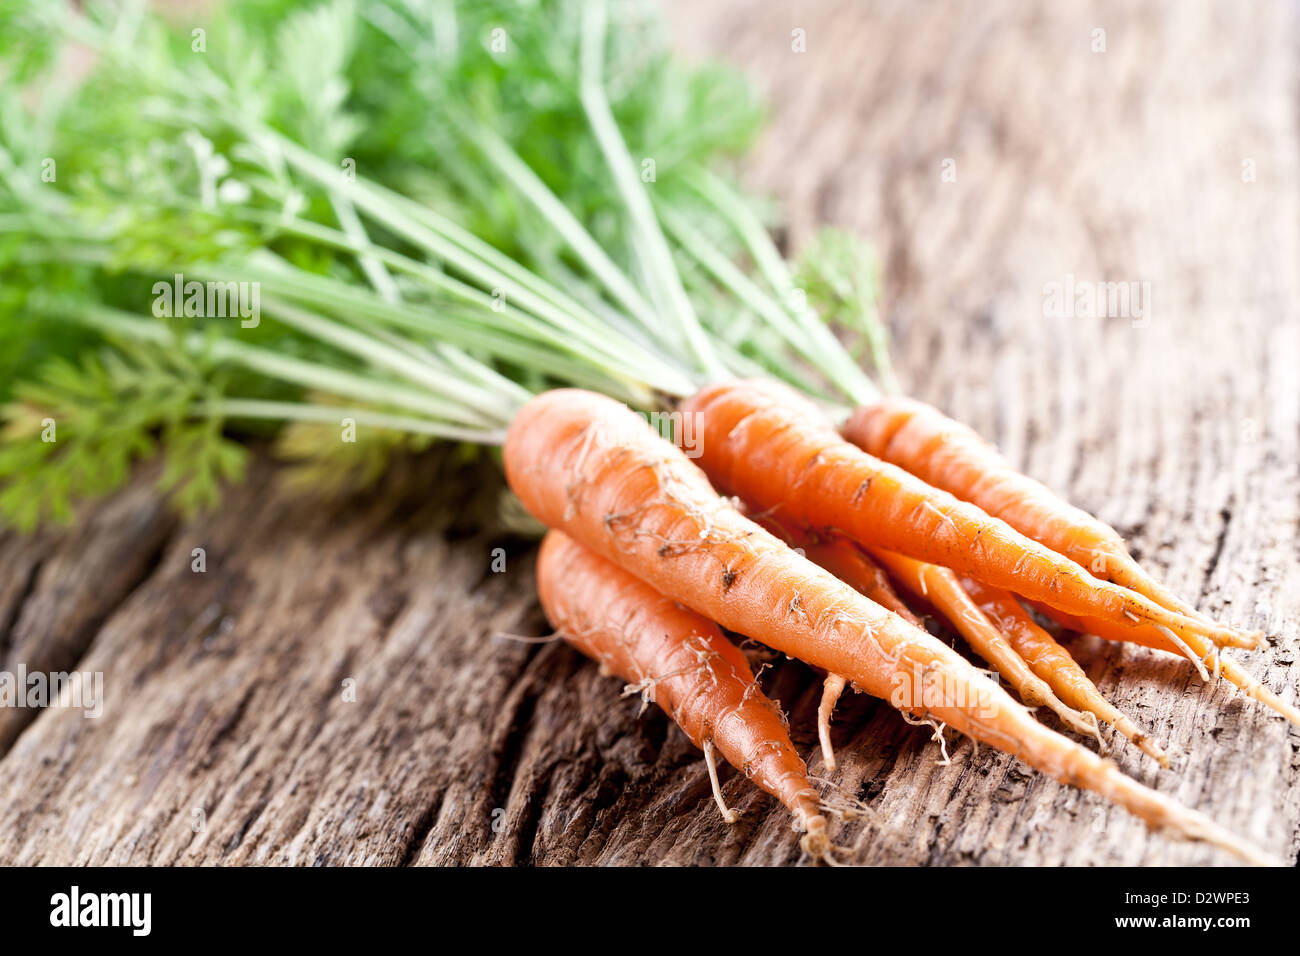 Carrots with leaves on a old wooden table. Stock Photo